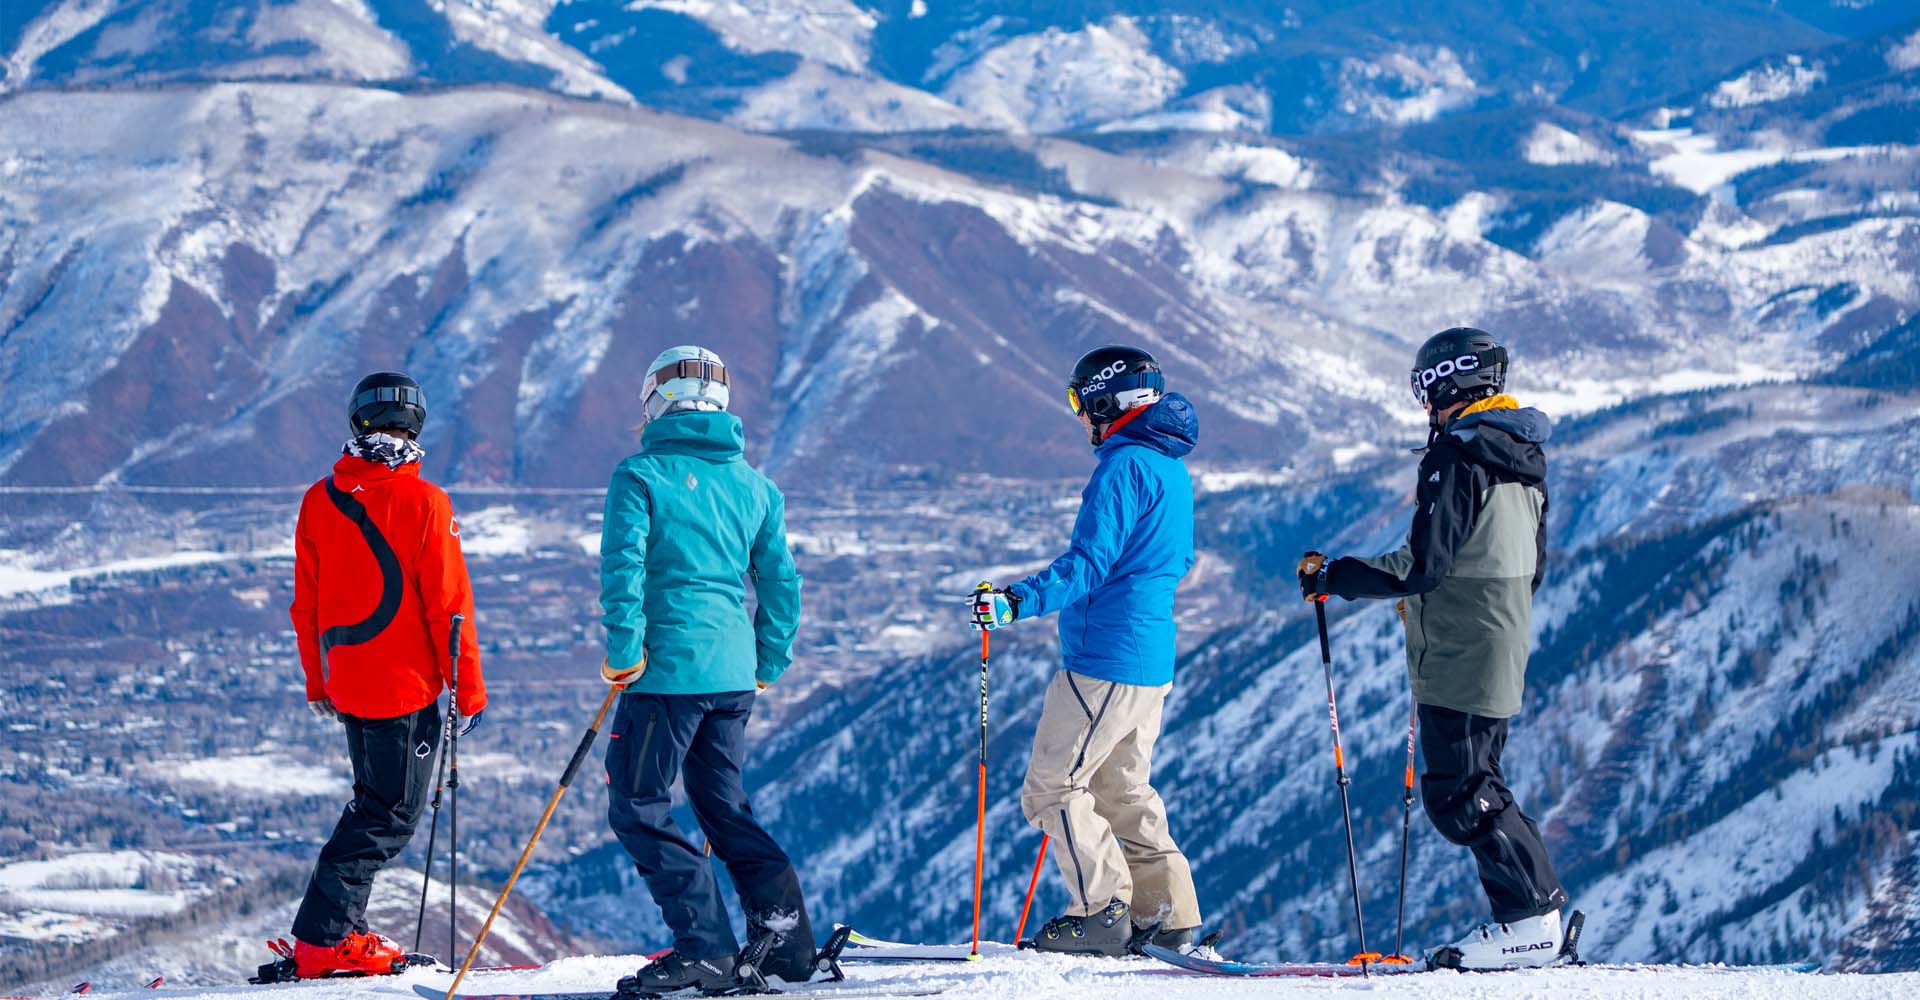 a group of people on skis